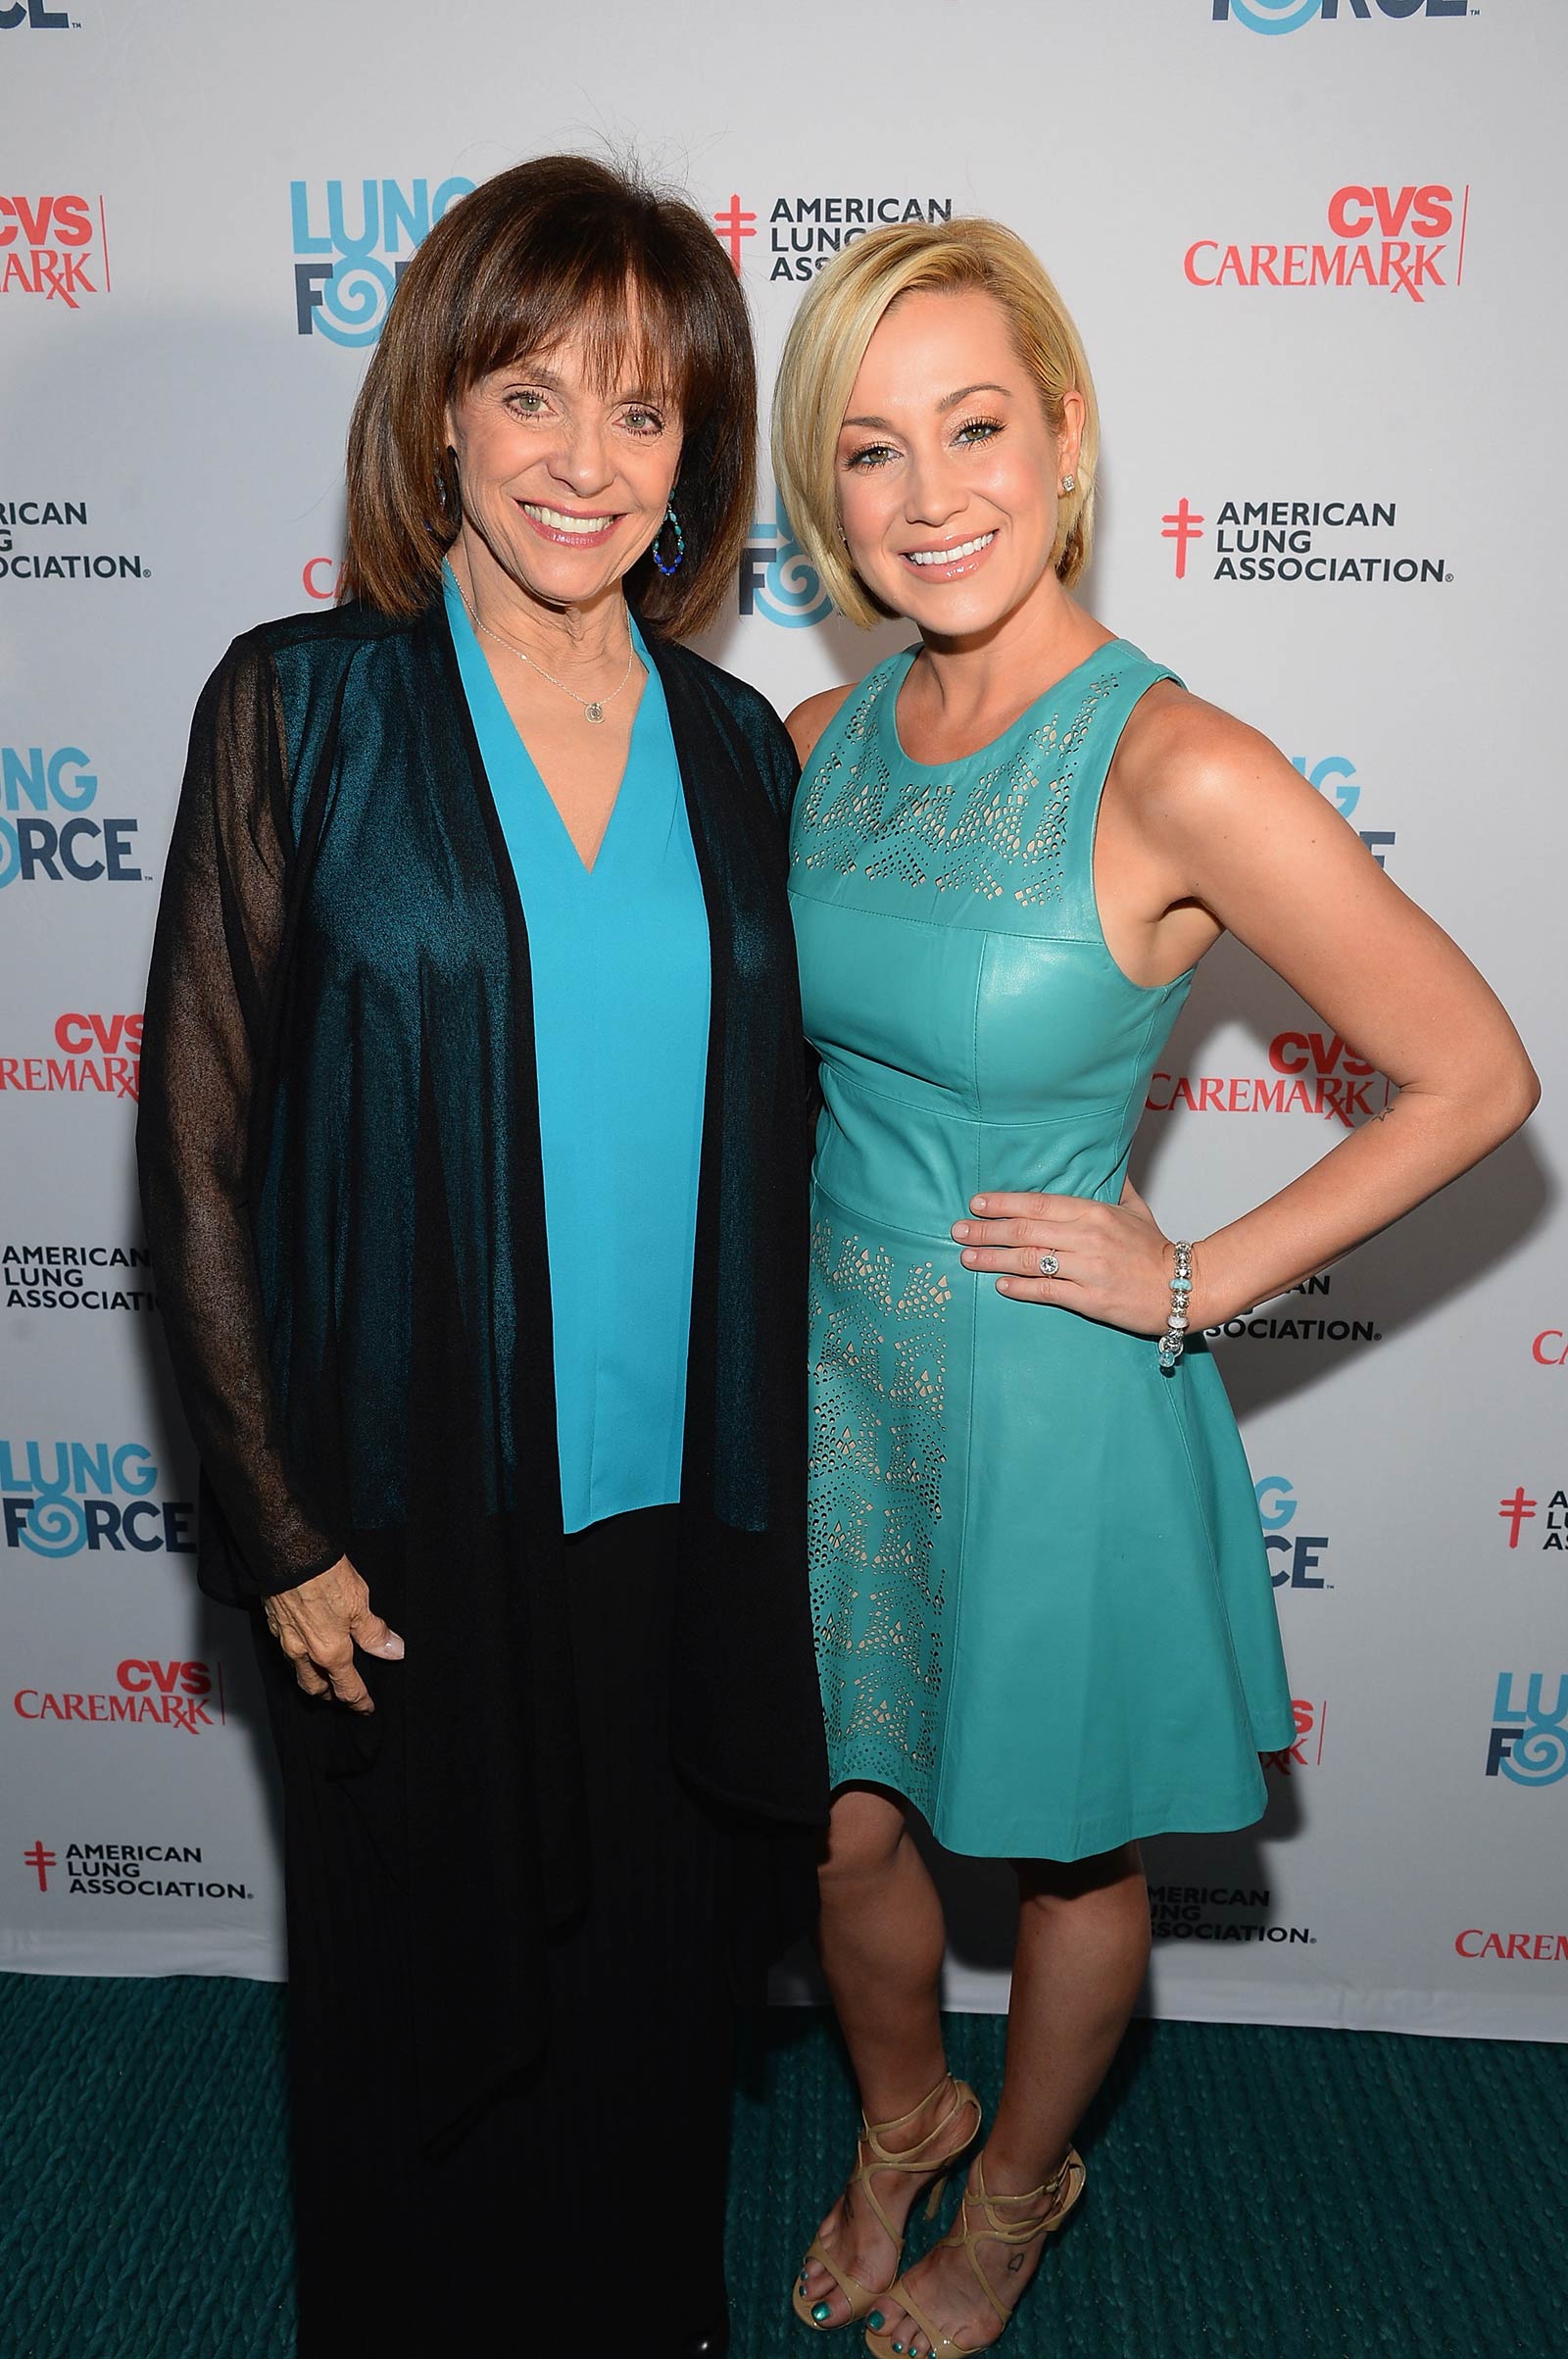 Kellie Pickler attends American Lung Association’s LUNG FORCE gala